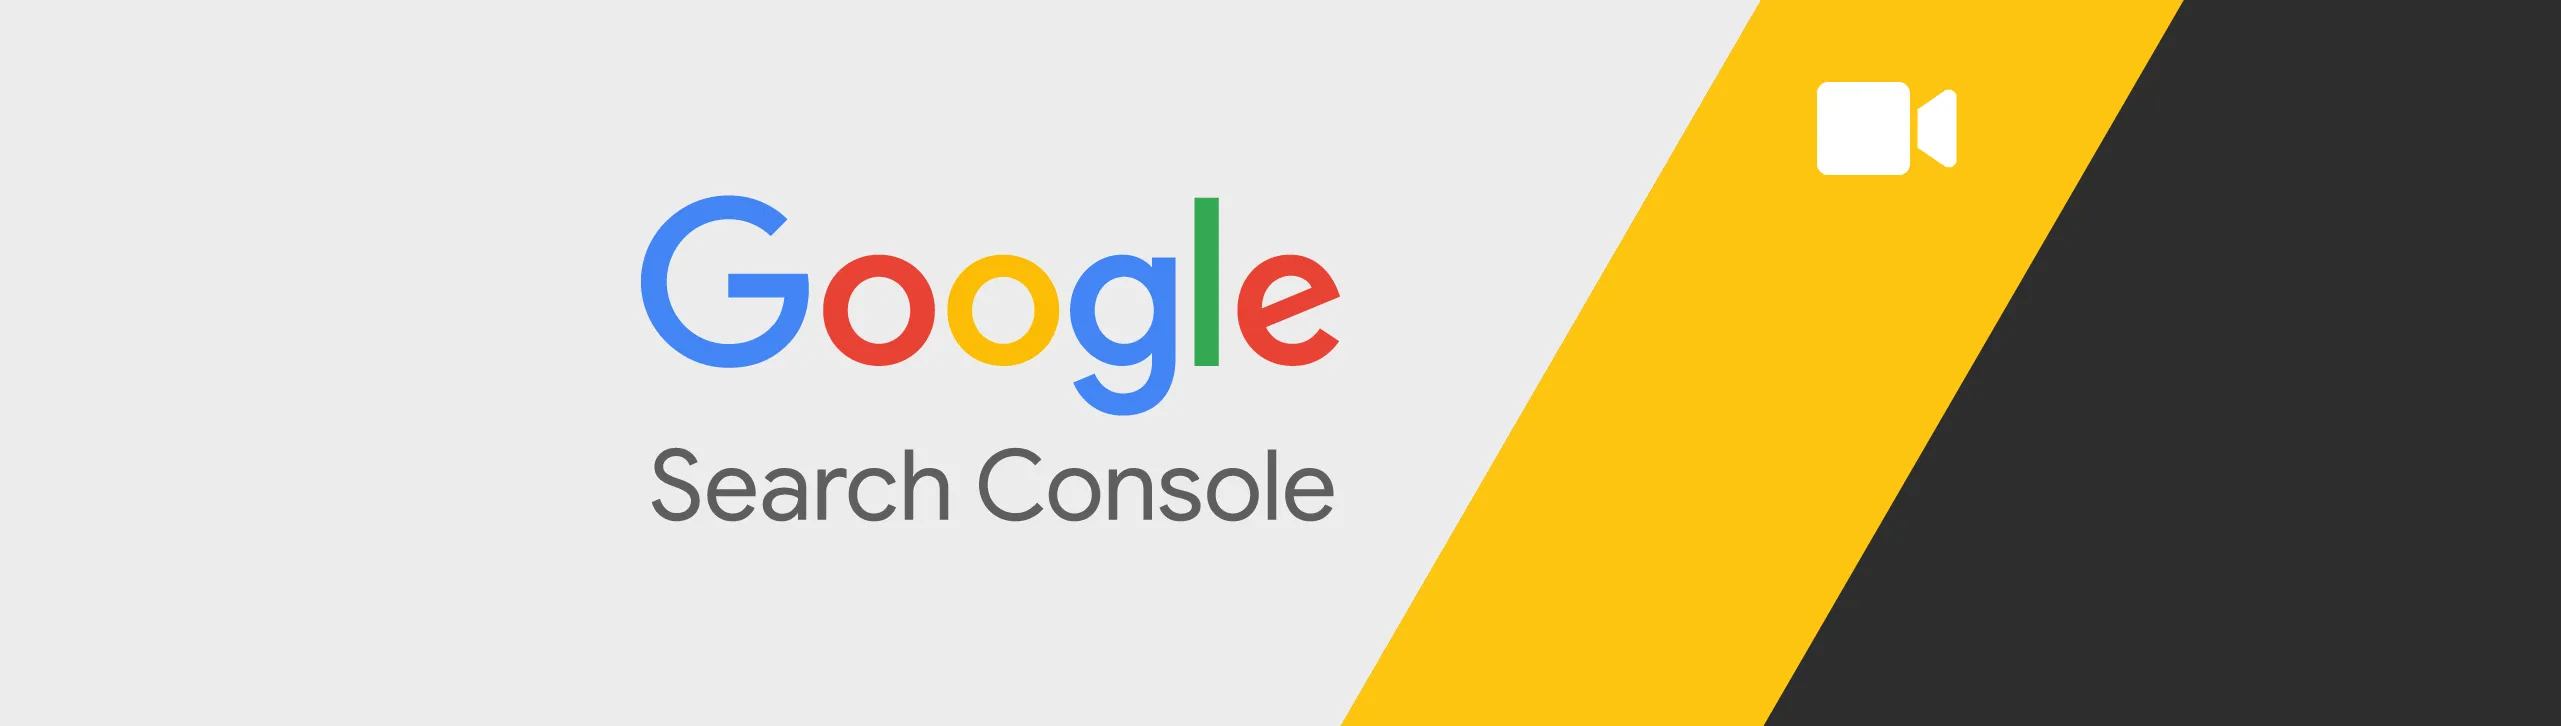 How to Use Google Search Console for Keyword Research